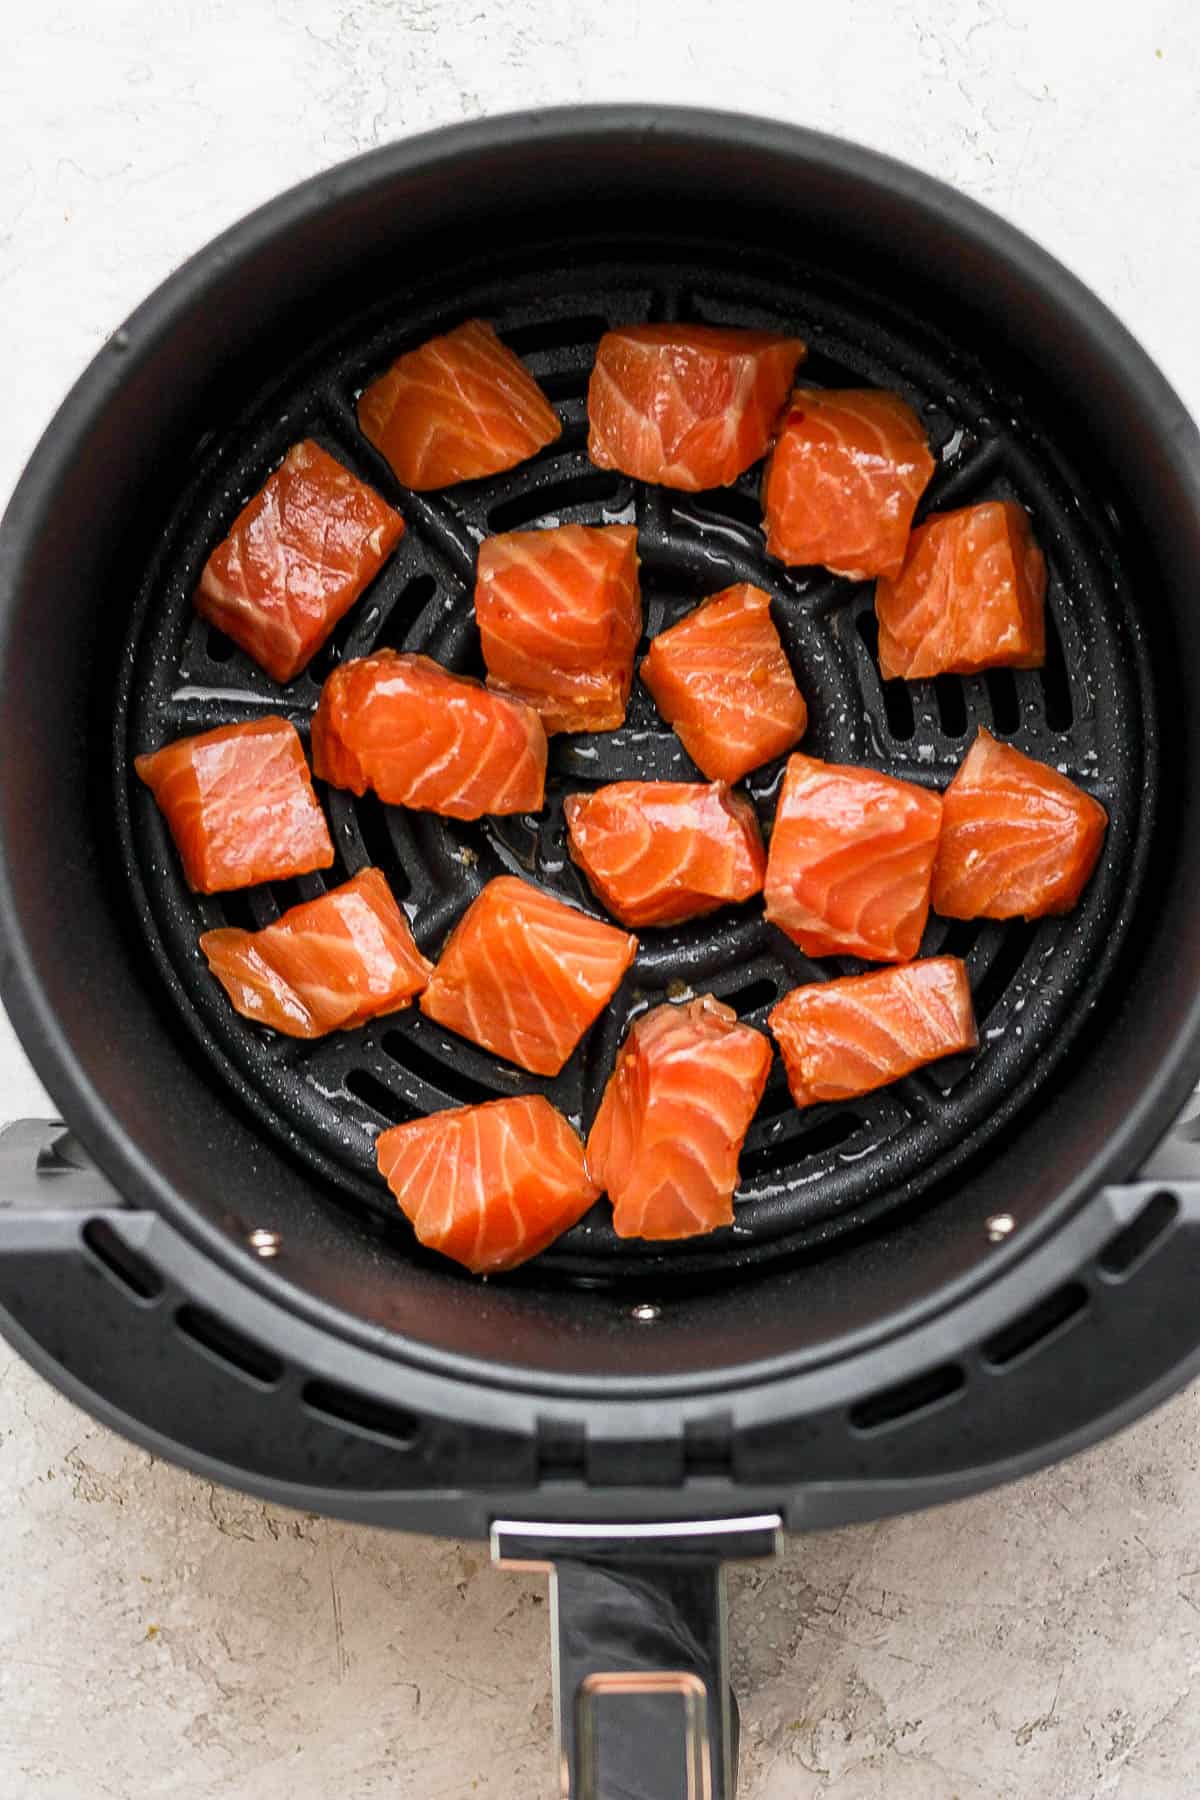 Marinated salmon bites in the air fryer basket before cooking.